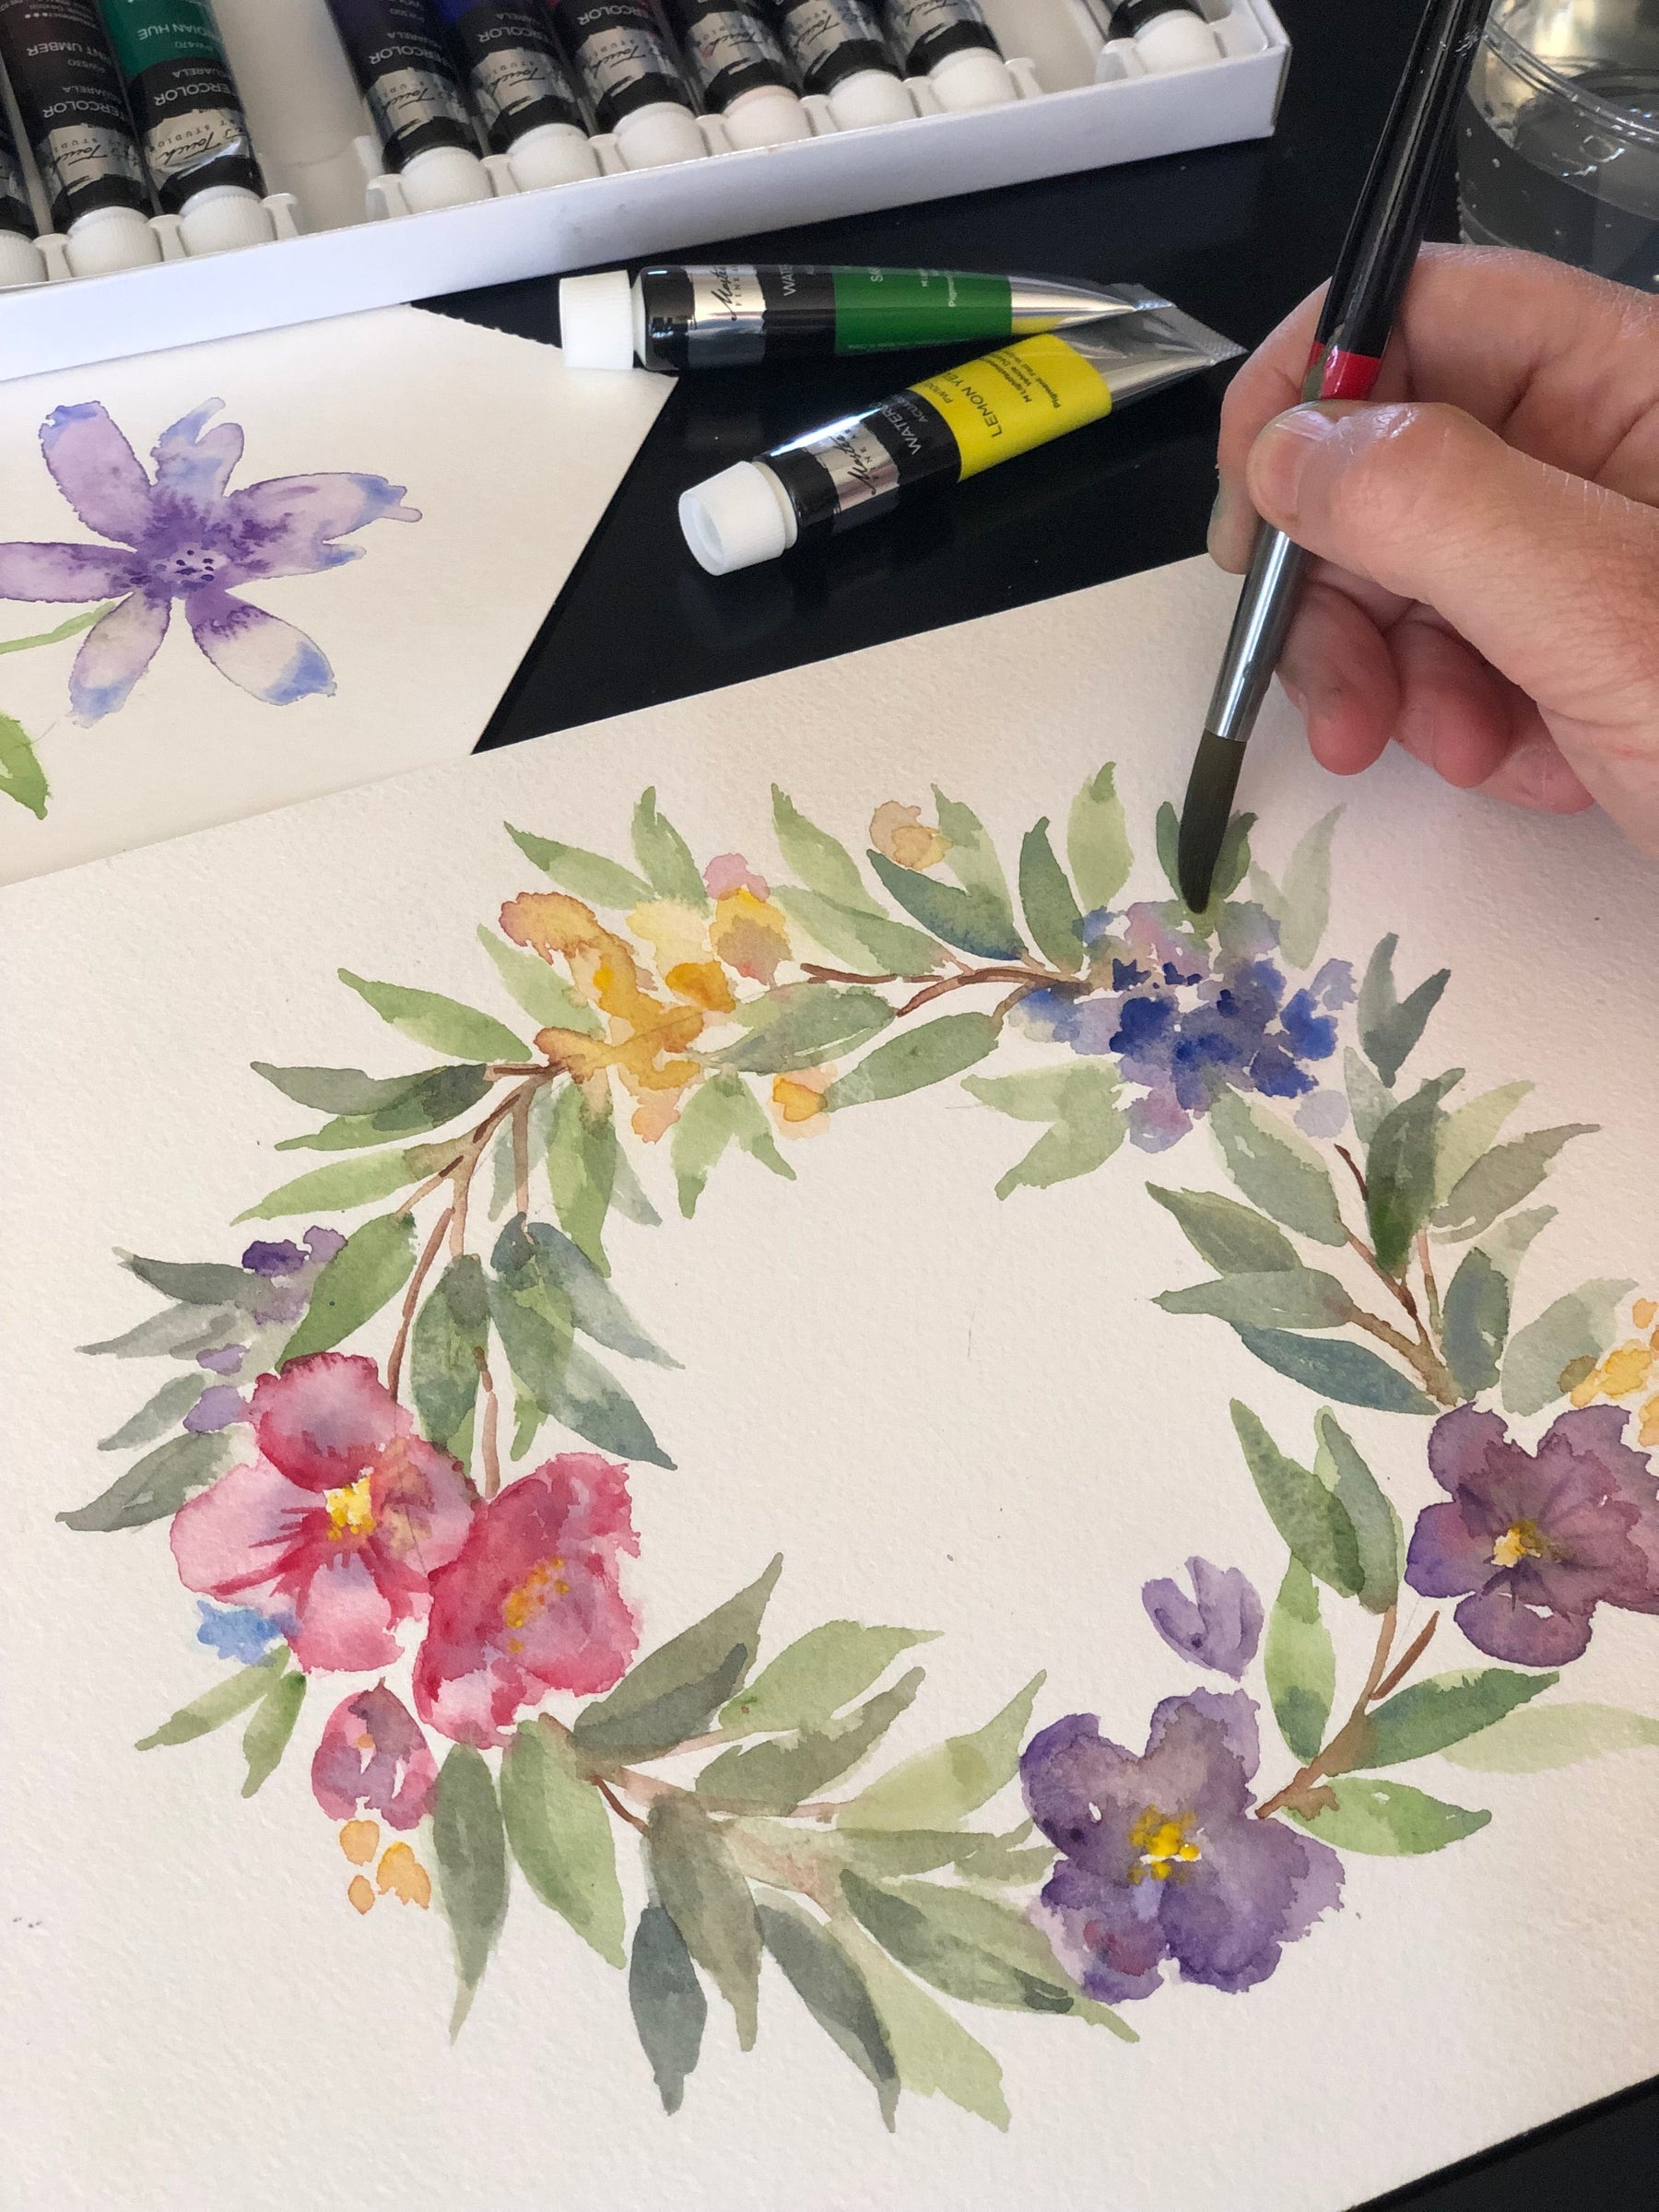 Watercolor Workshop: Thursday, April 18th 6 - 8:00pm with Sarah Young